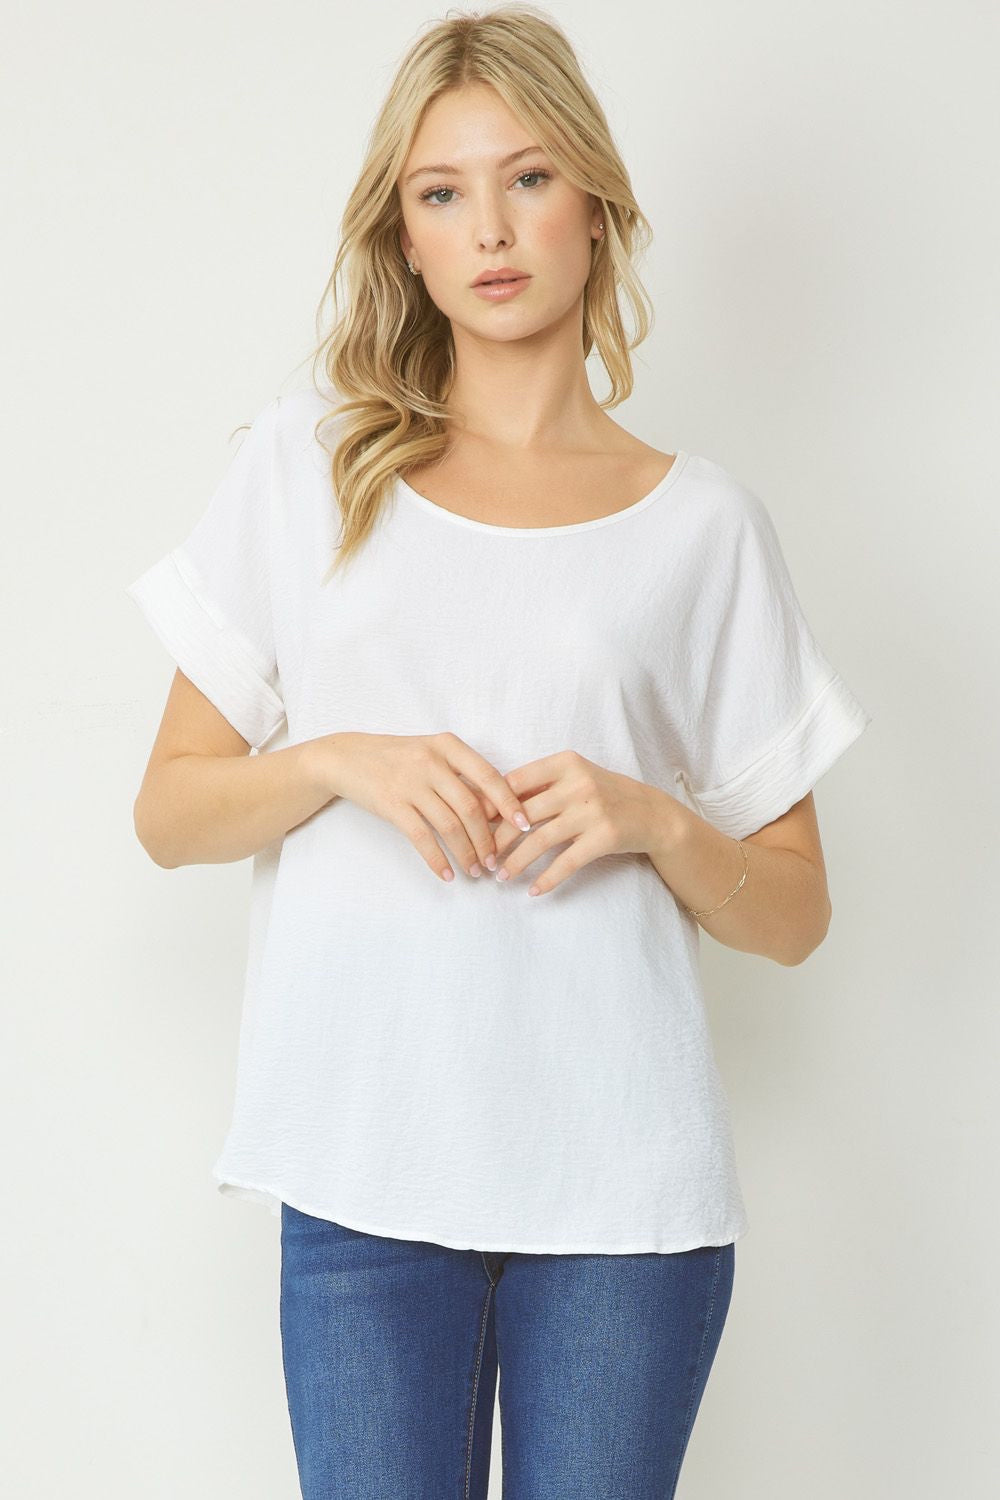 White scoop-neck top featuring permanent rolled sleeve detail and an asymmetrical hem.